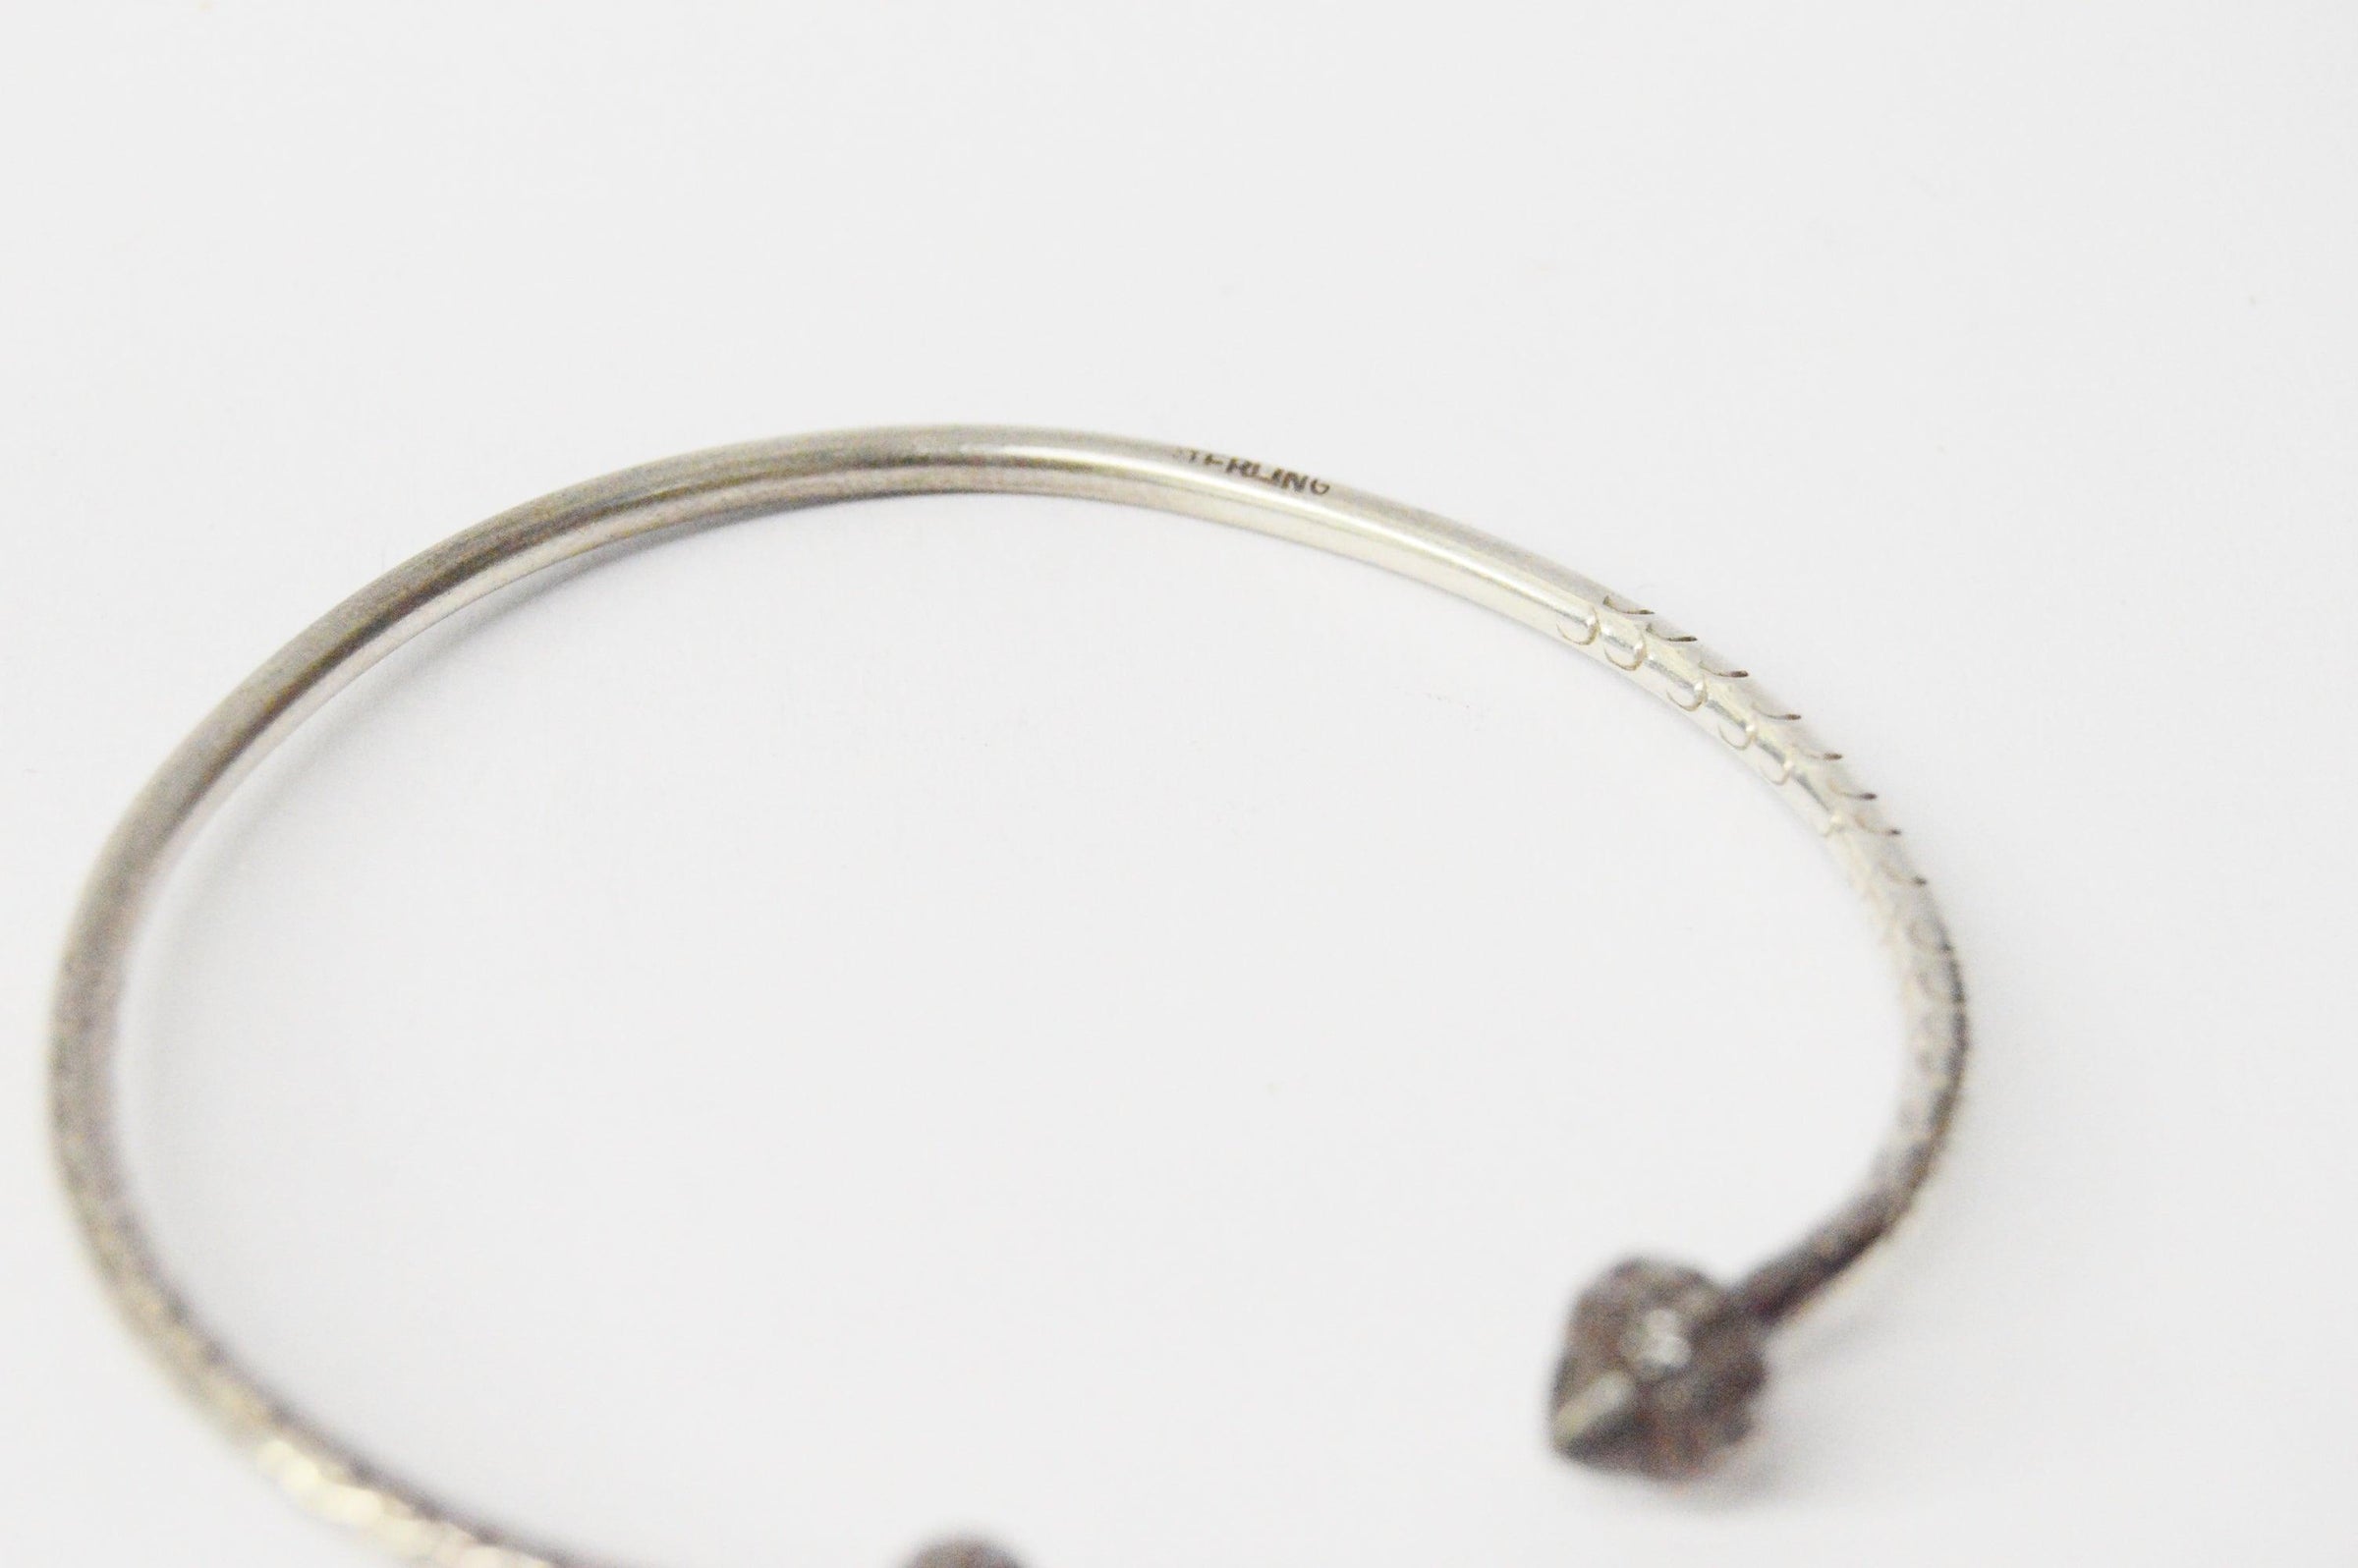 West Indies Sterling Silver Pointed Cocoa Pod Cuff Bangle Bracelet - Hers and His Treasures